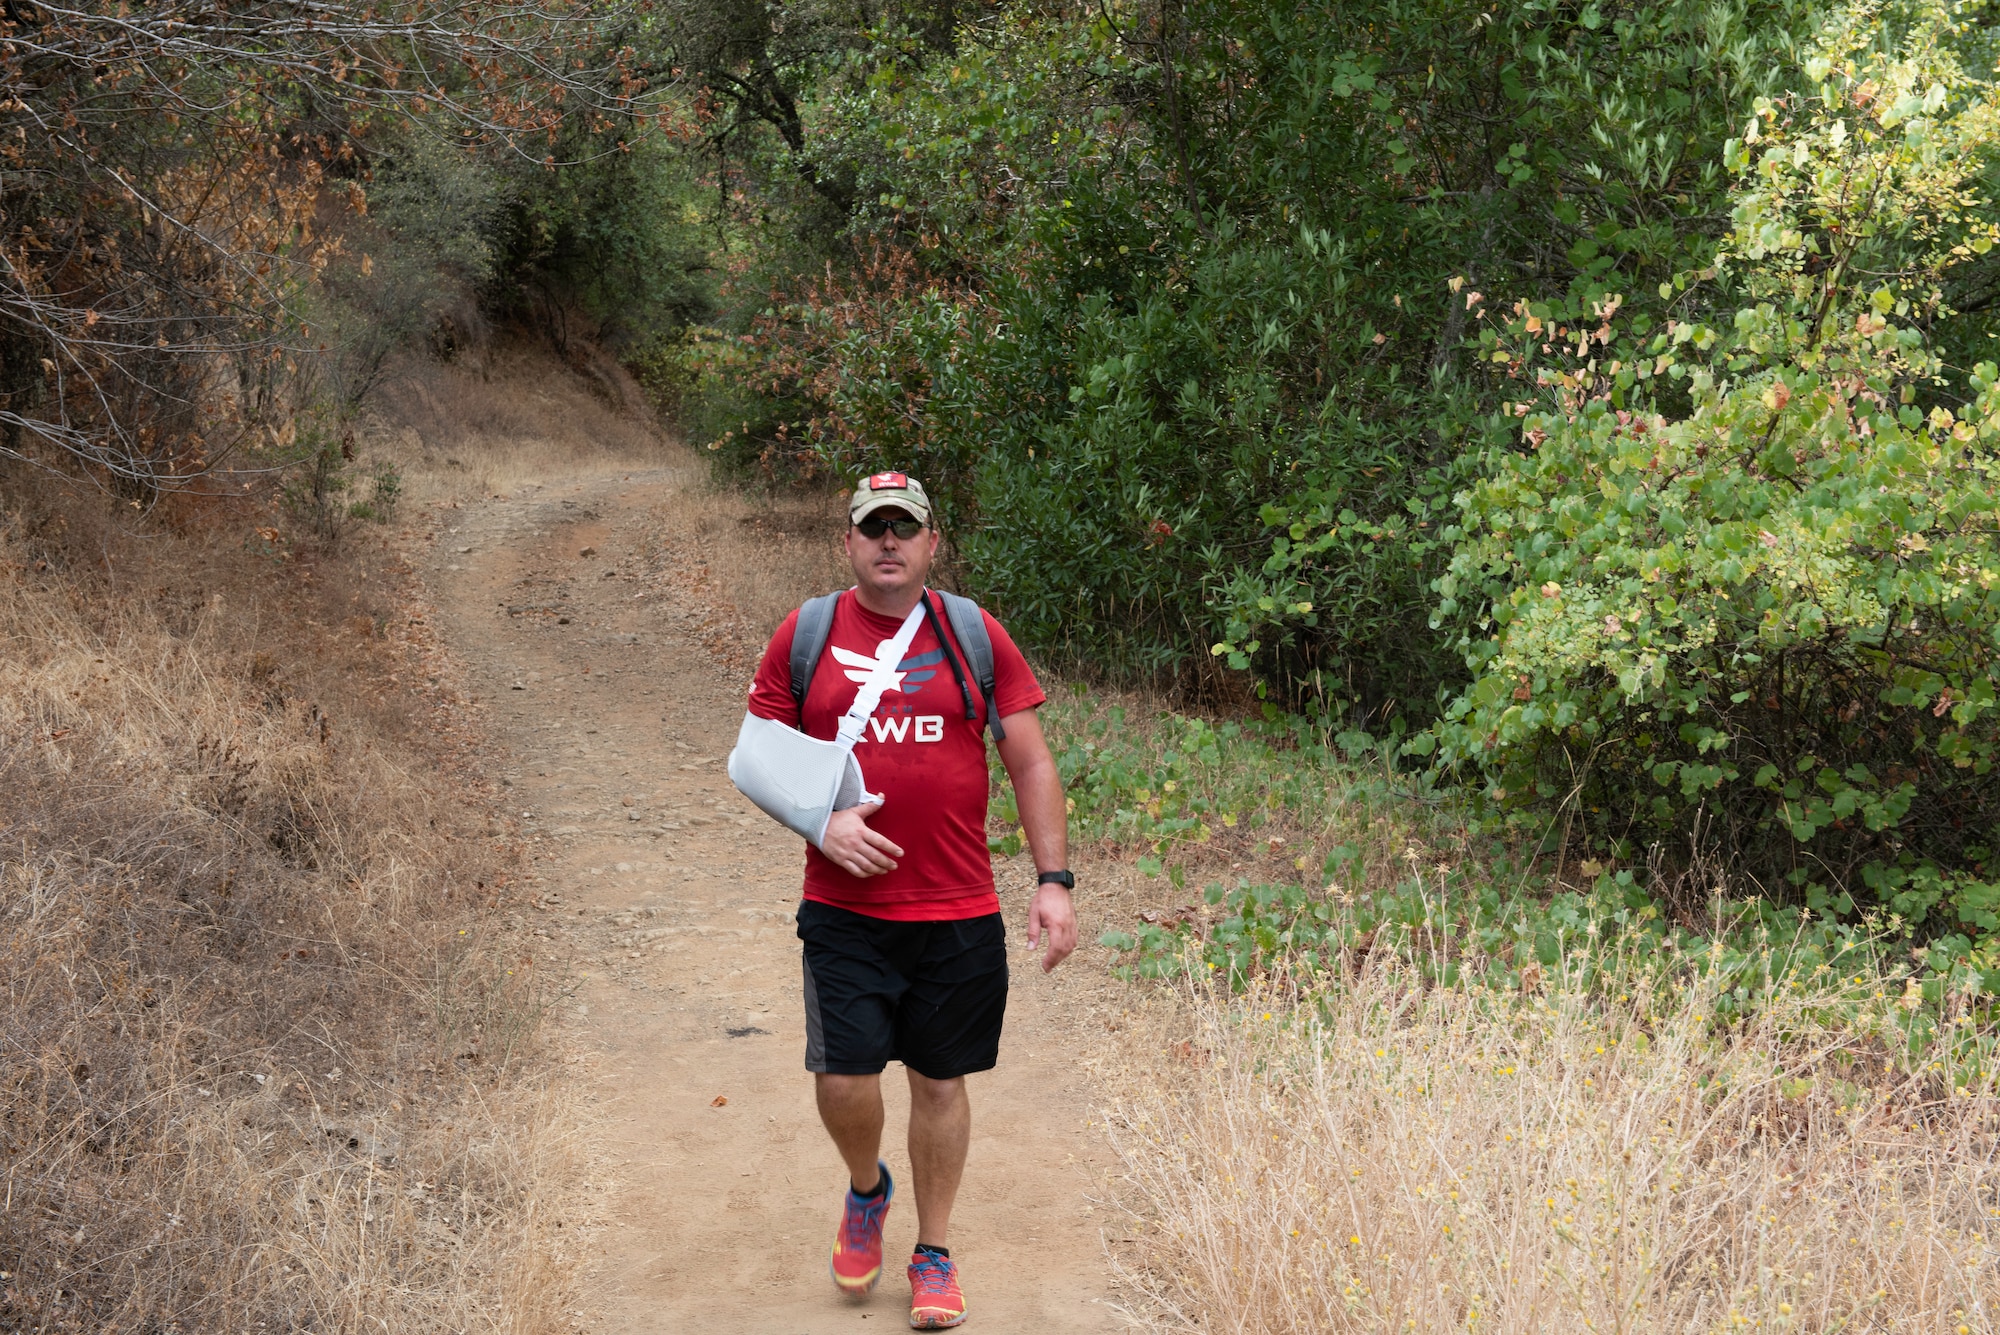 U.S. Air Force veteran Chris Coffelt, hikes along the Middle Fork American River Quarry Trail Aug. 16, 2020, in Auburn, California. Coffelt is participating in the Gold Star Families Ruck March, an annual event to honor gold star families and fallen service members. He dedicated the 11-mile hike to U.S. Army Spc. Wayne Geiger, who died Oct. 18, 2007 in Iraq. (U.S. Air Force photo by Tech. Sgt. James Hodgman)